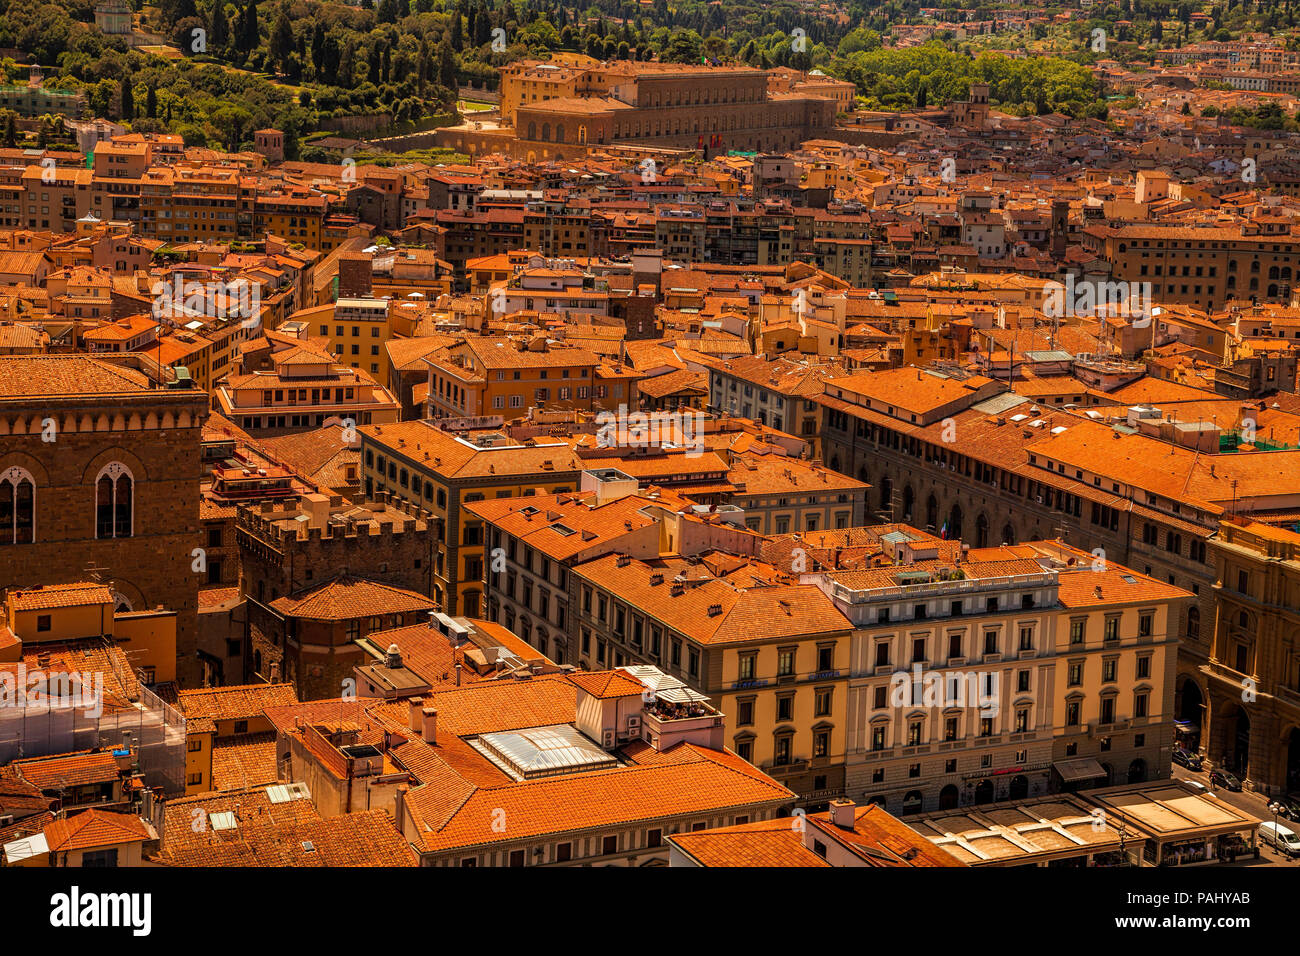 Aerial view of Florence, Italy Stock Photo